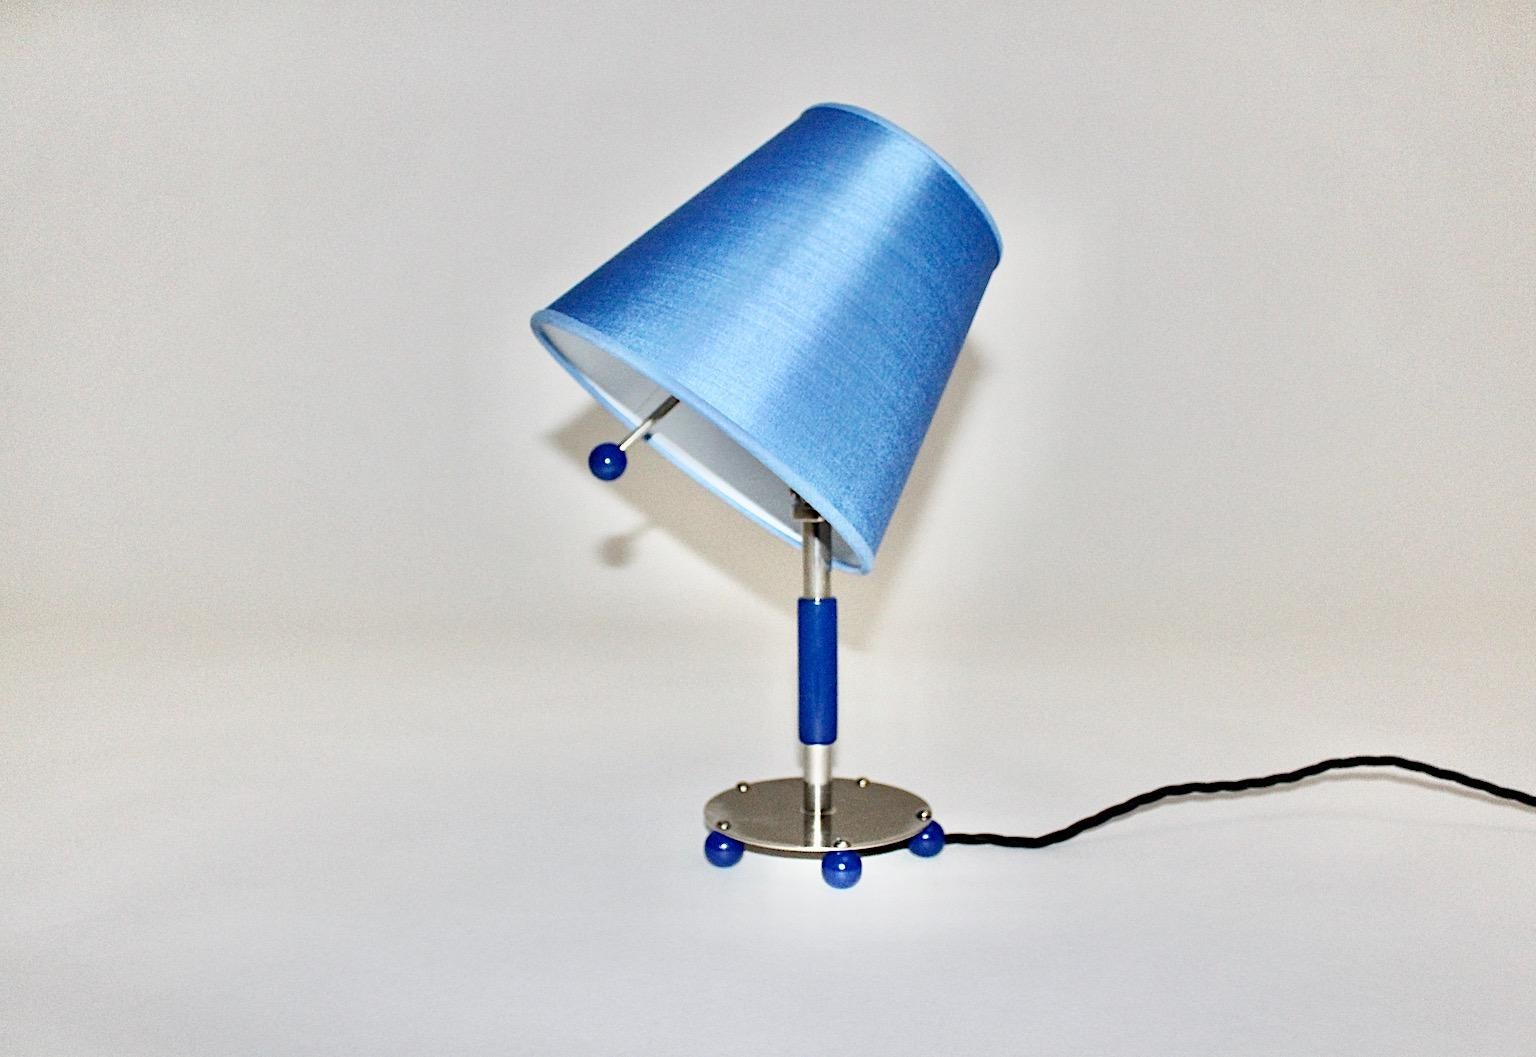 A blue Art Deco vintage chromed tube metal, which features also blue wooden details. The renewed lamp shade shows a funky blue color tone. A great feature is the adjustable shade function, at the shade so the light shine is easy to direct.
With few